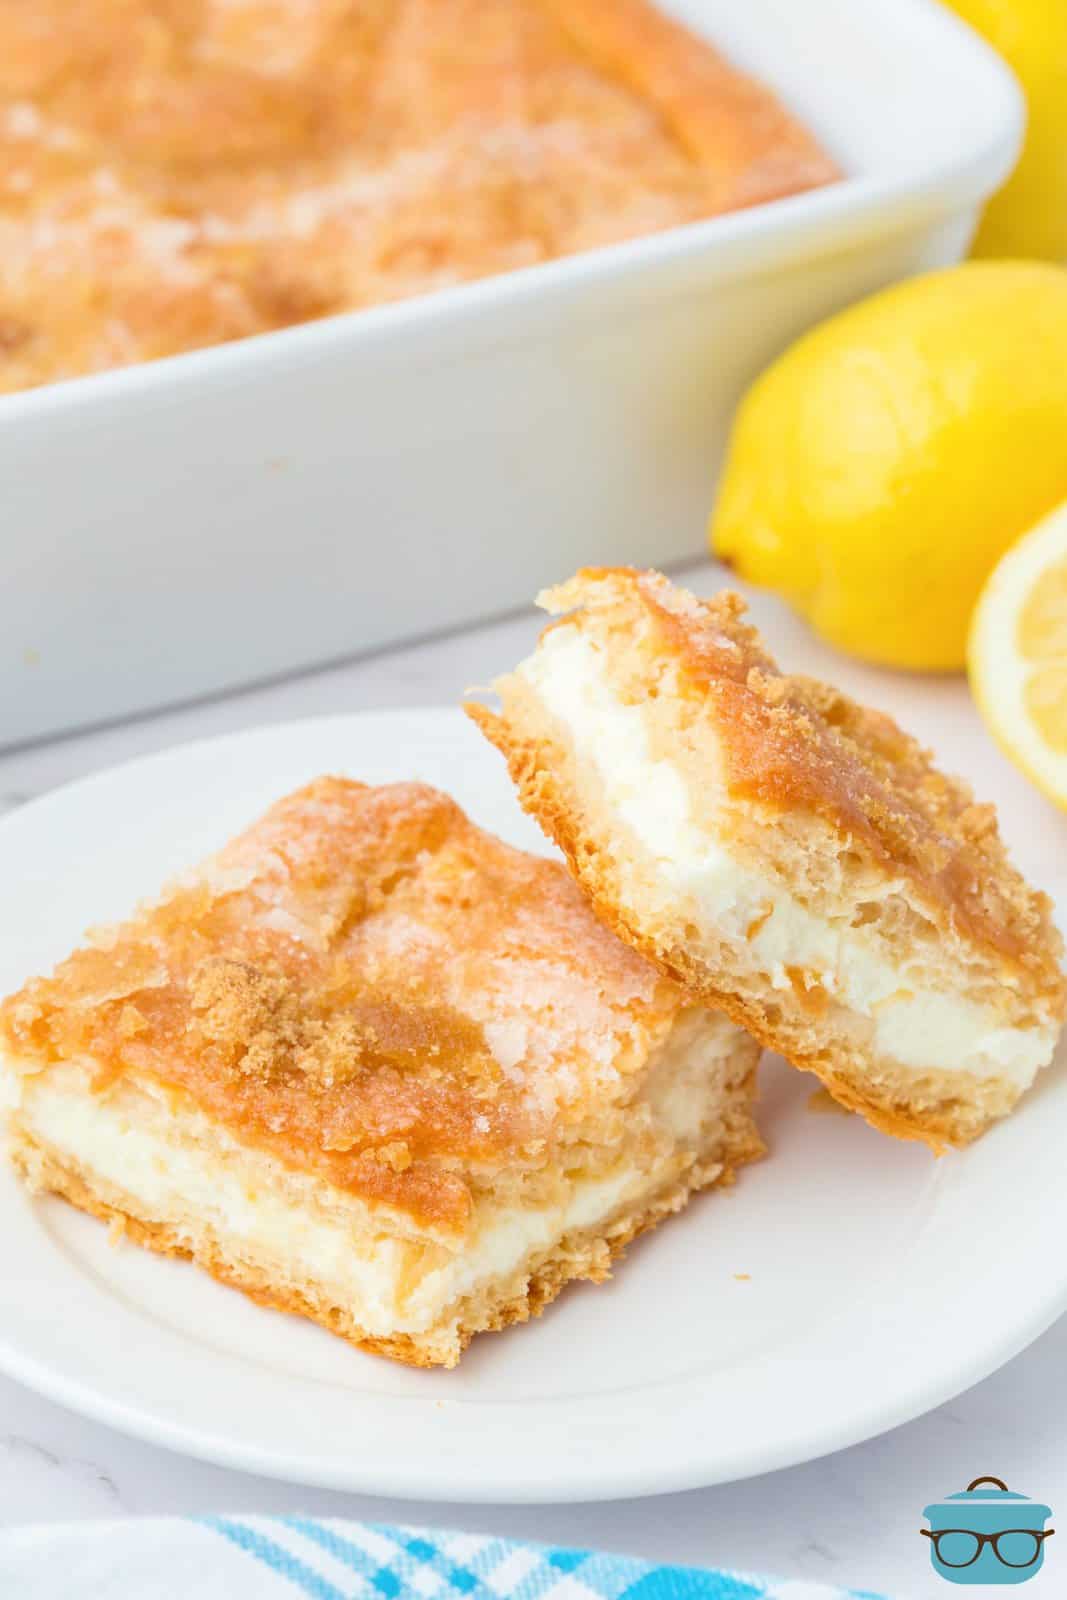 A plate with two lemon cheesecake bars, one on an angle.